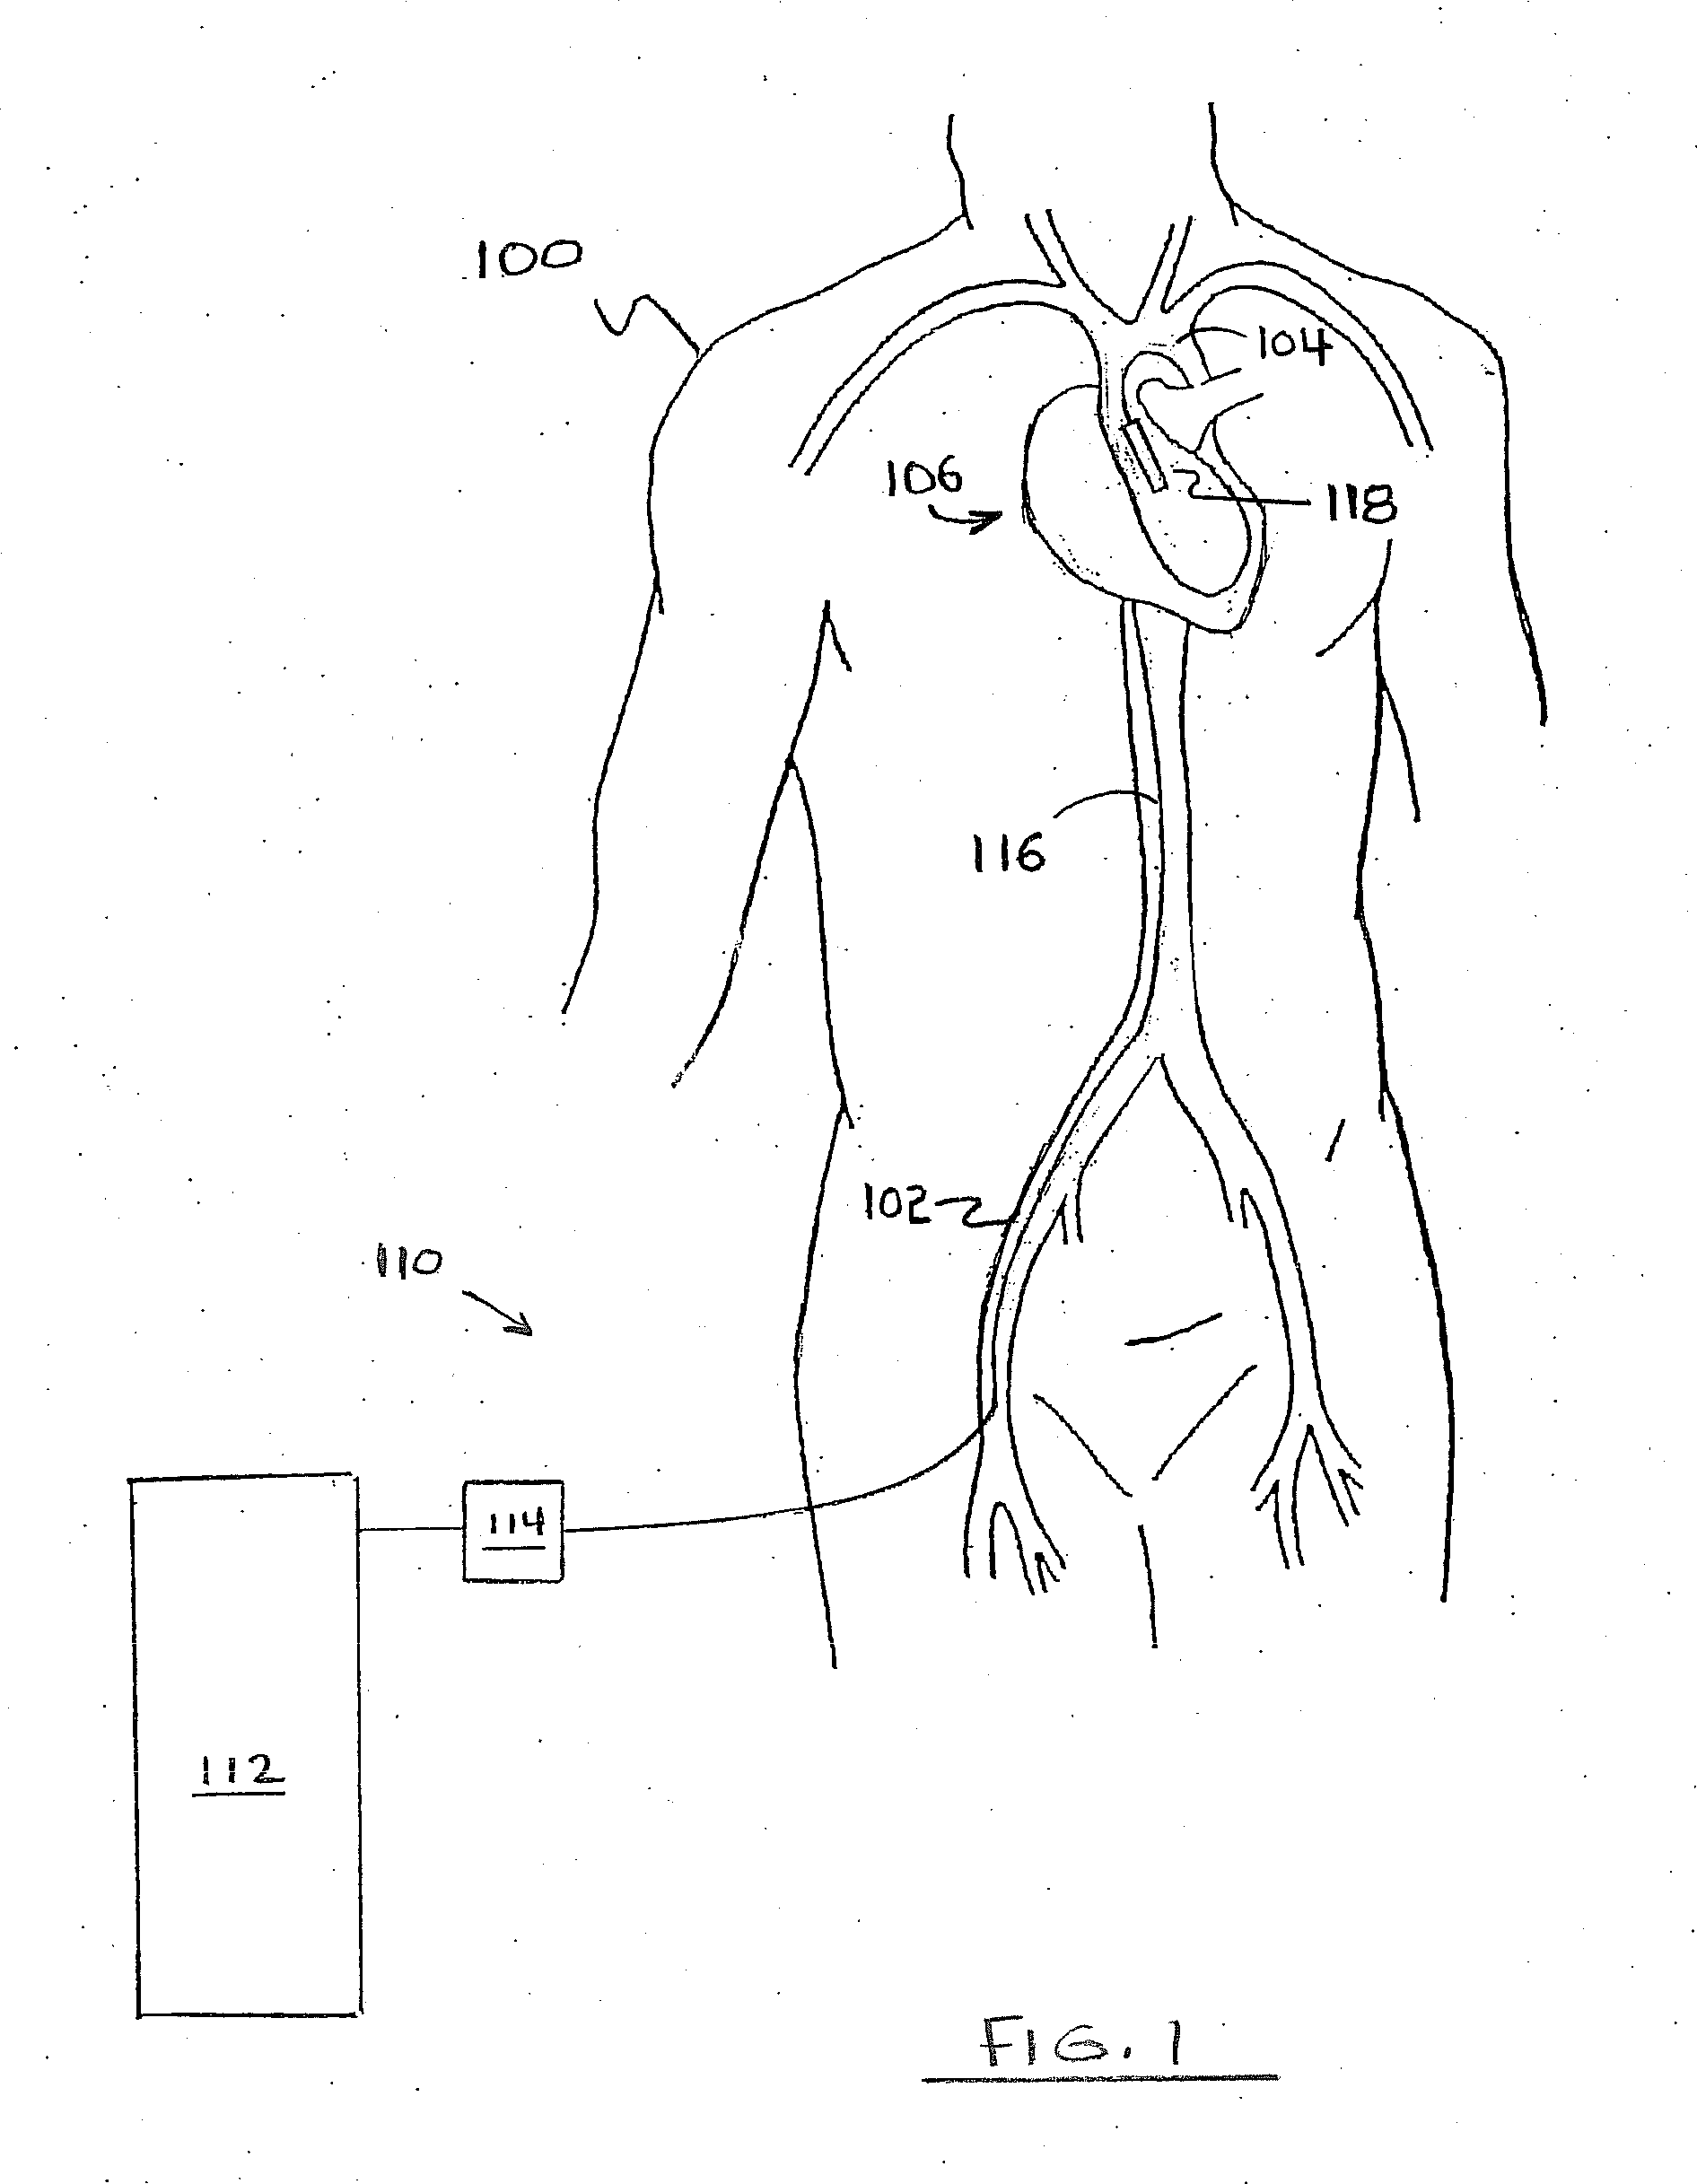 Method for Deployment of a Medical Device